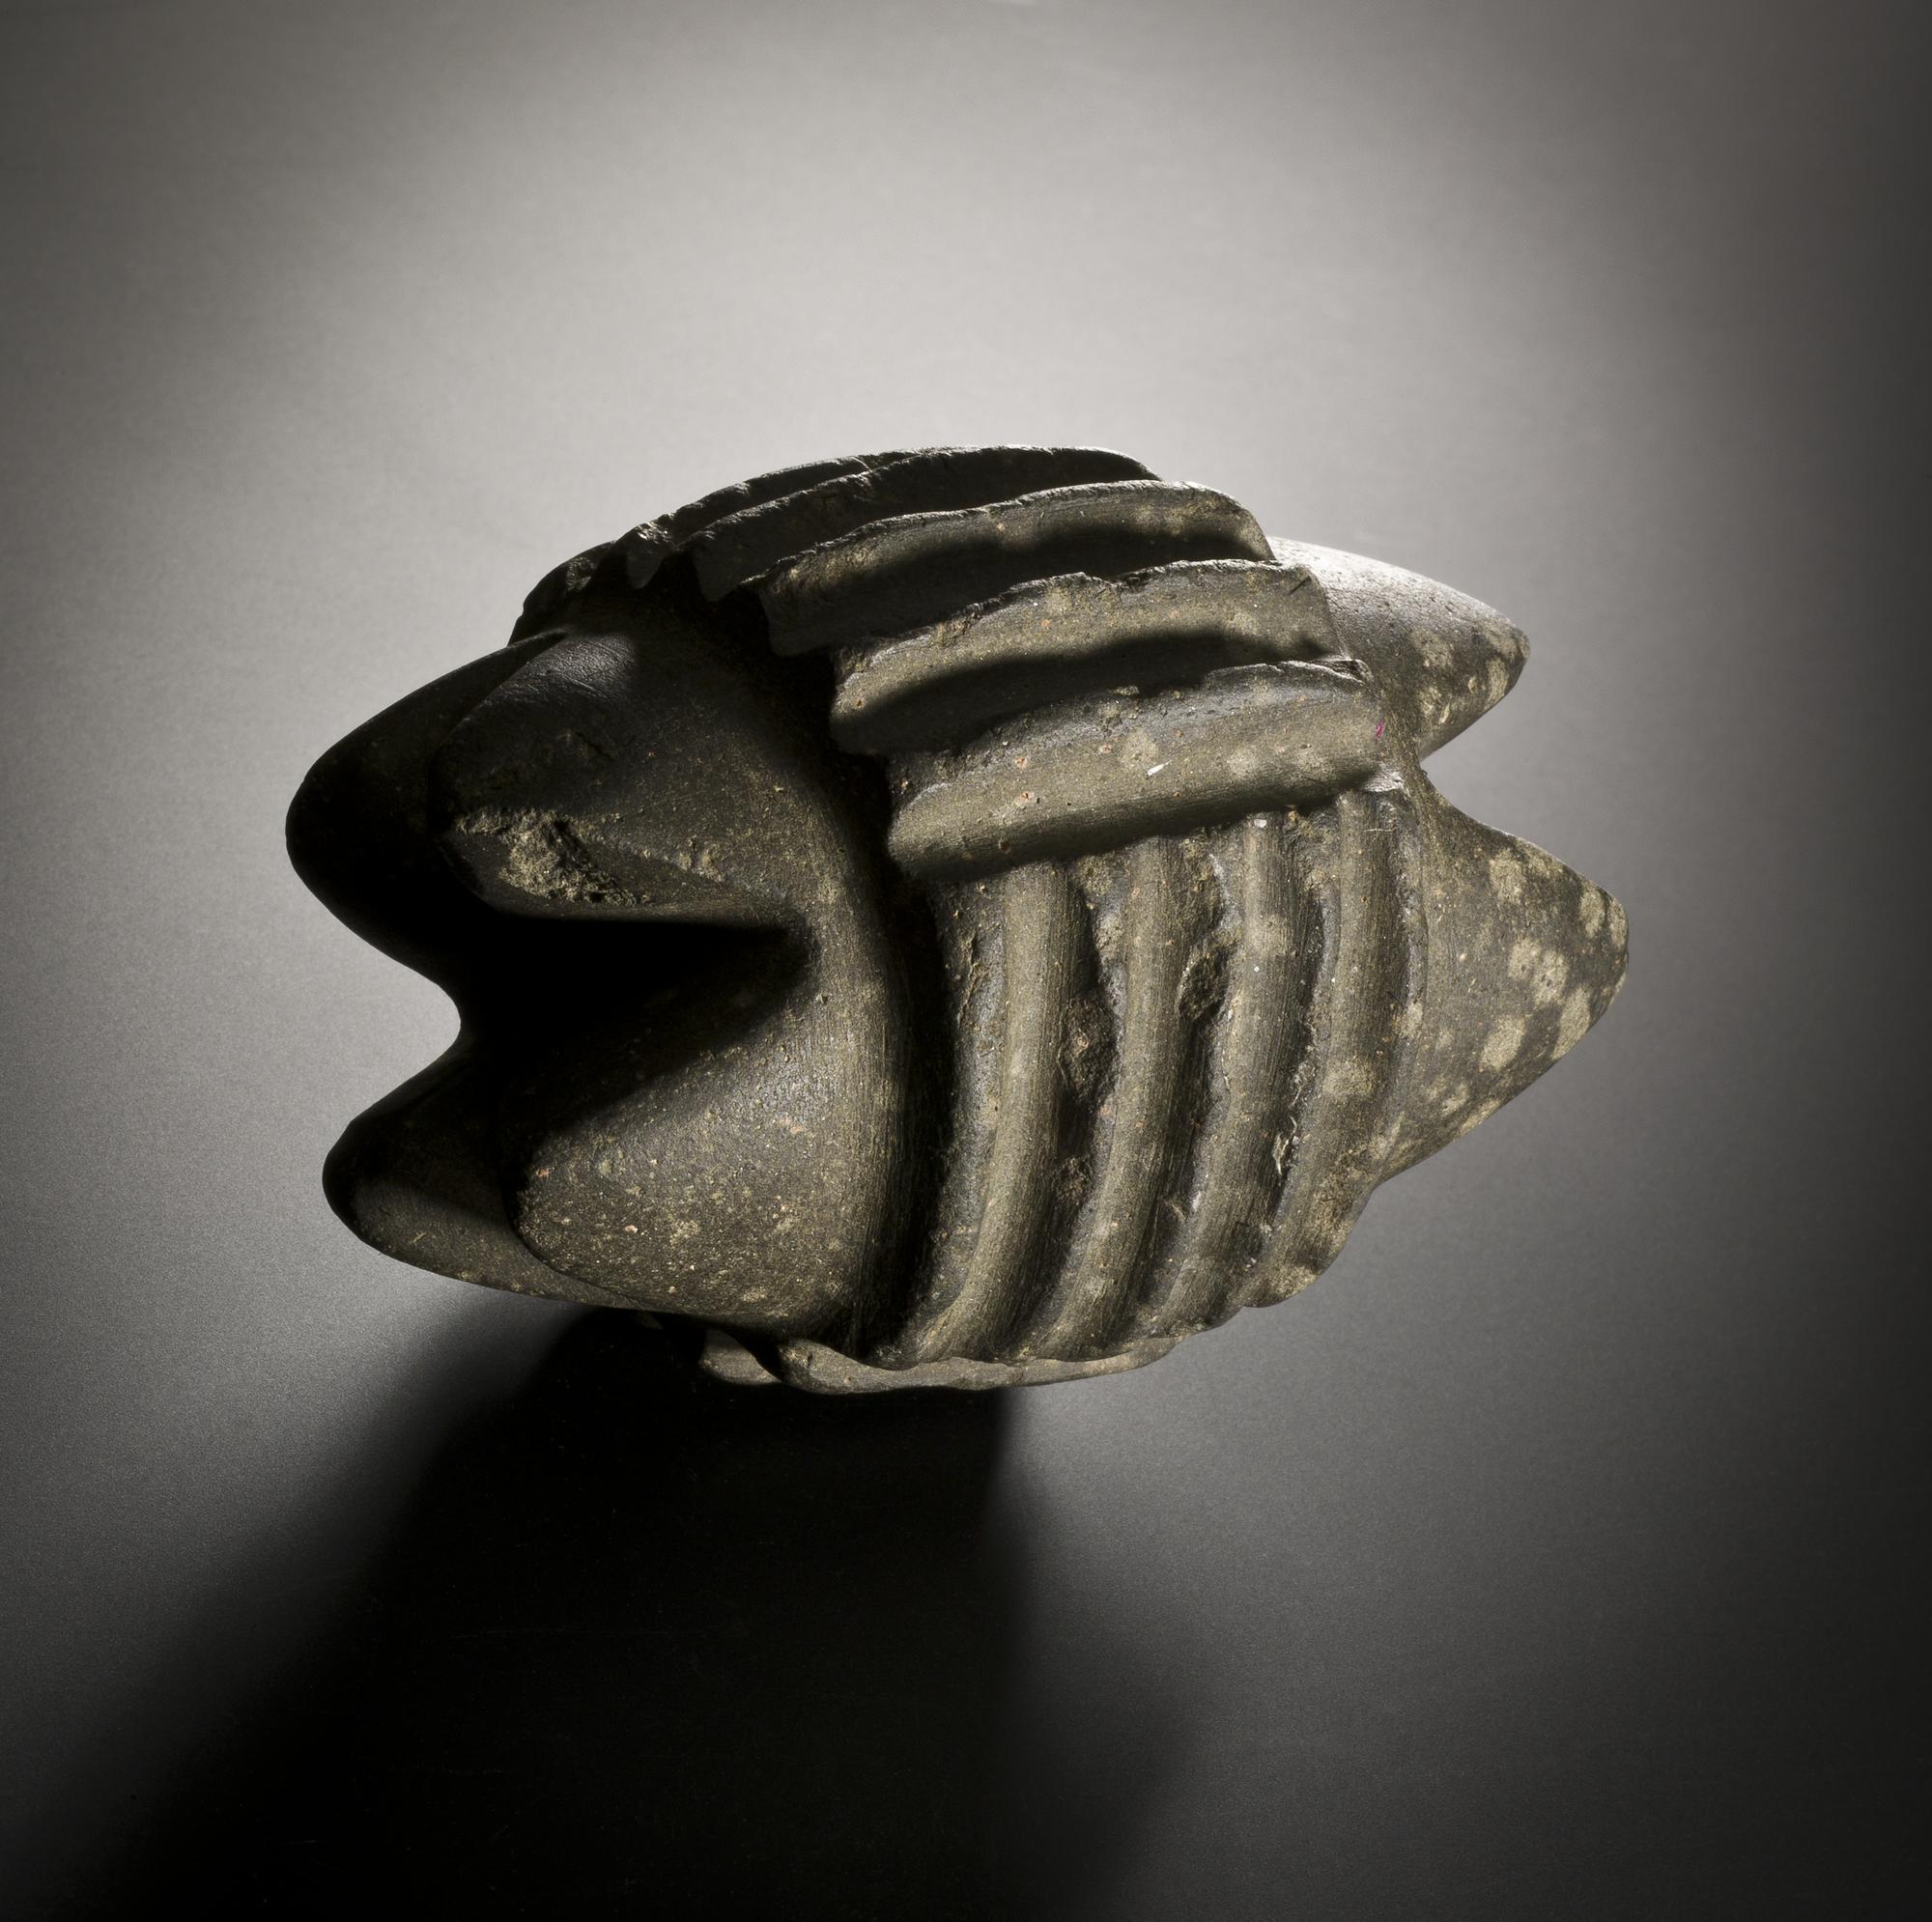 Carved stone object from Skara Brae, 2900 - 2600 BC.